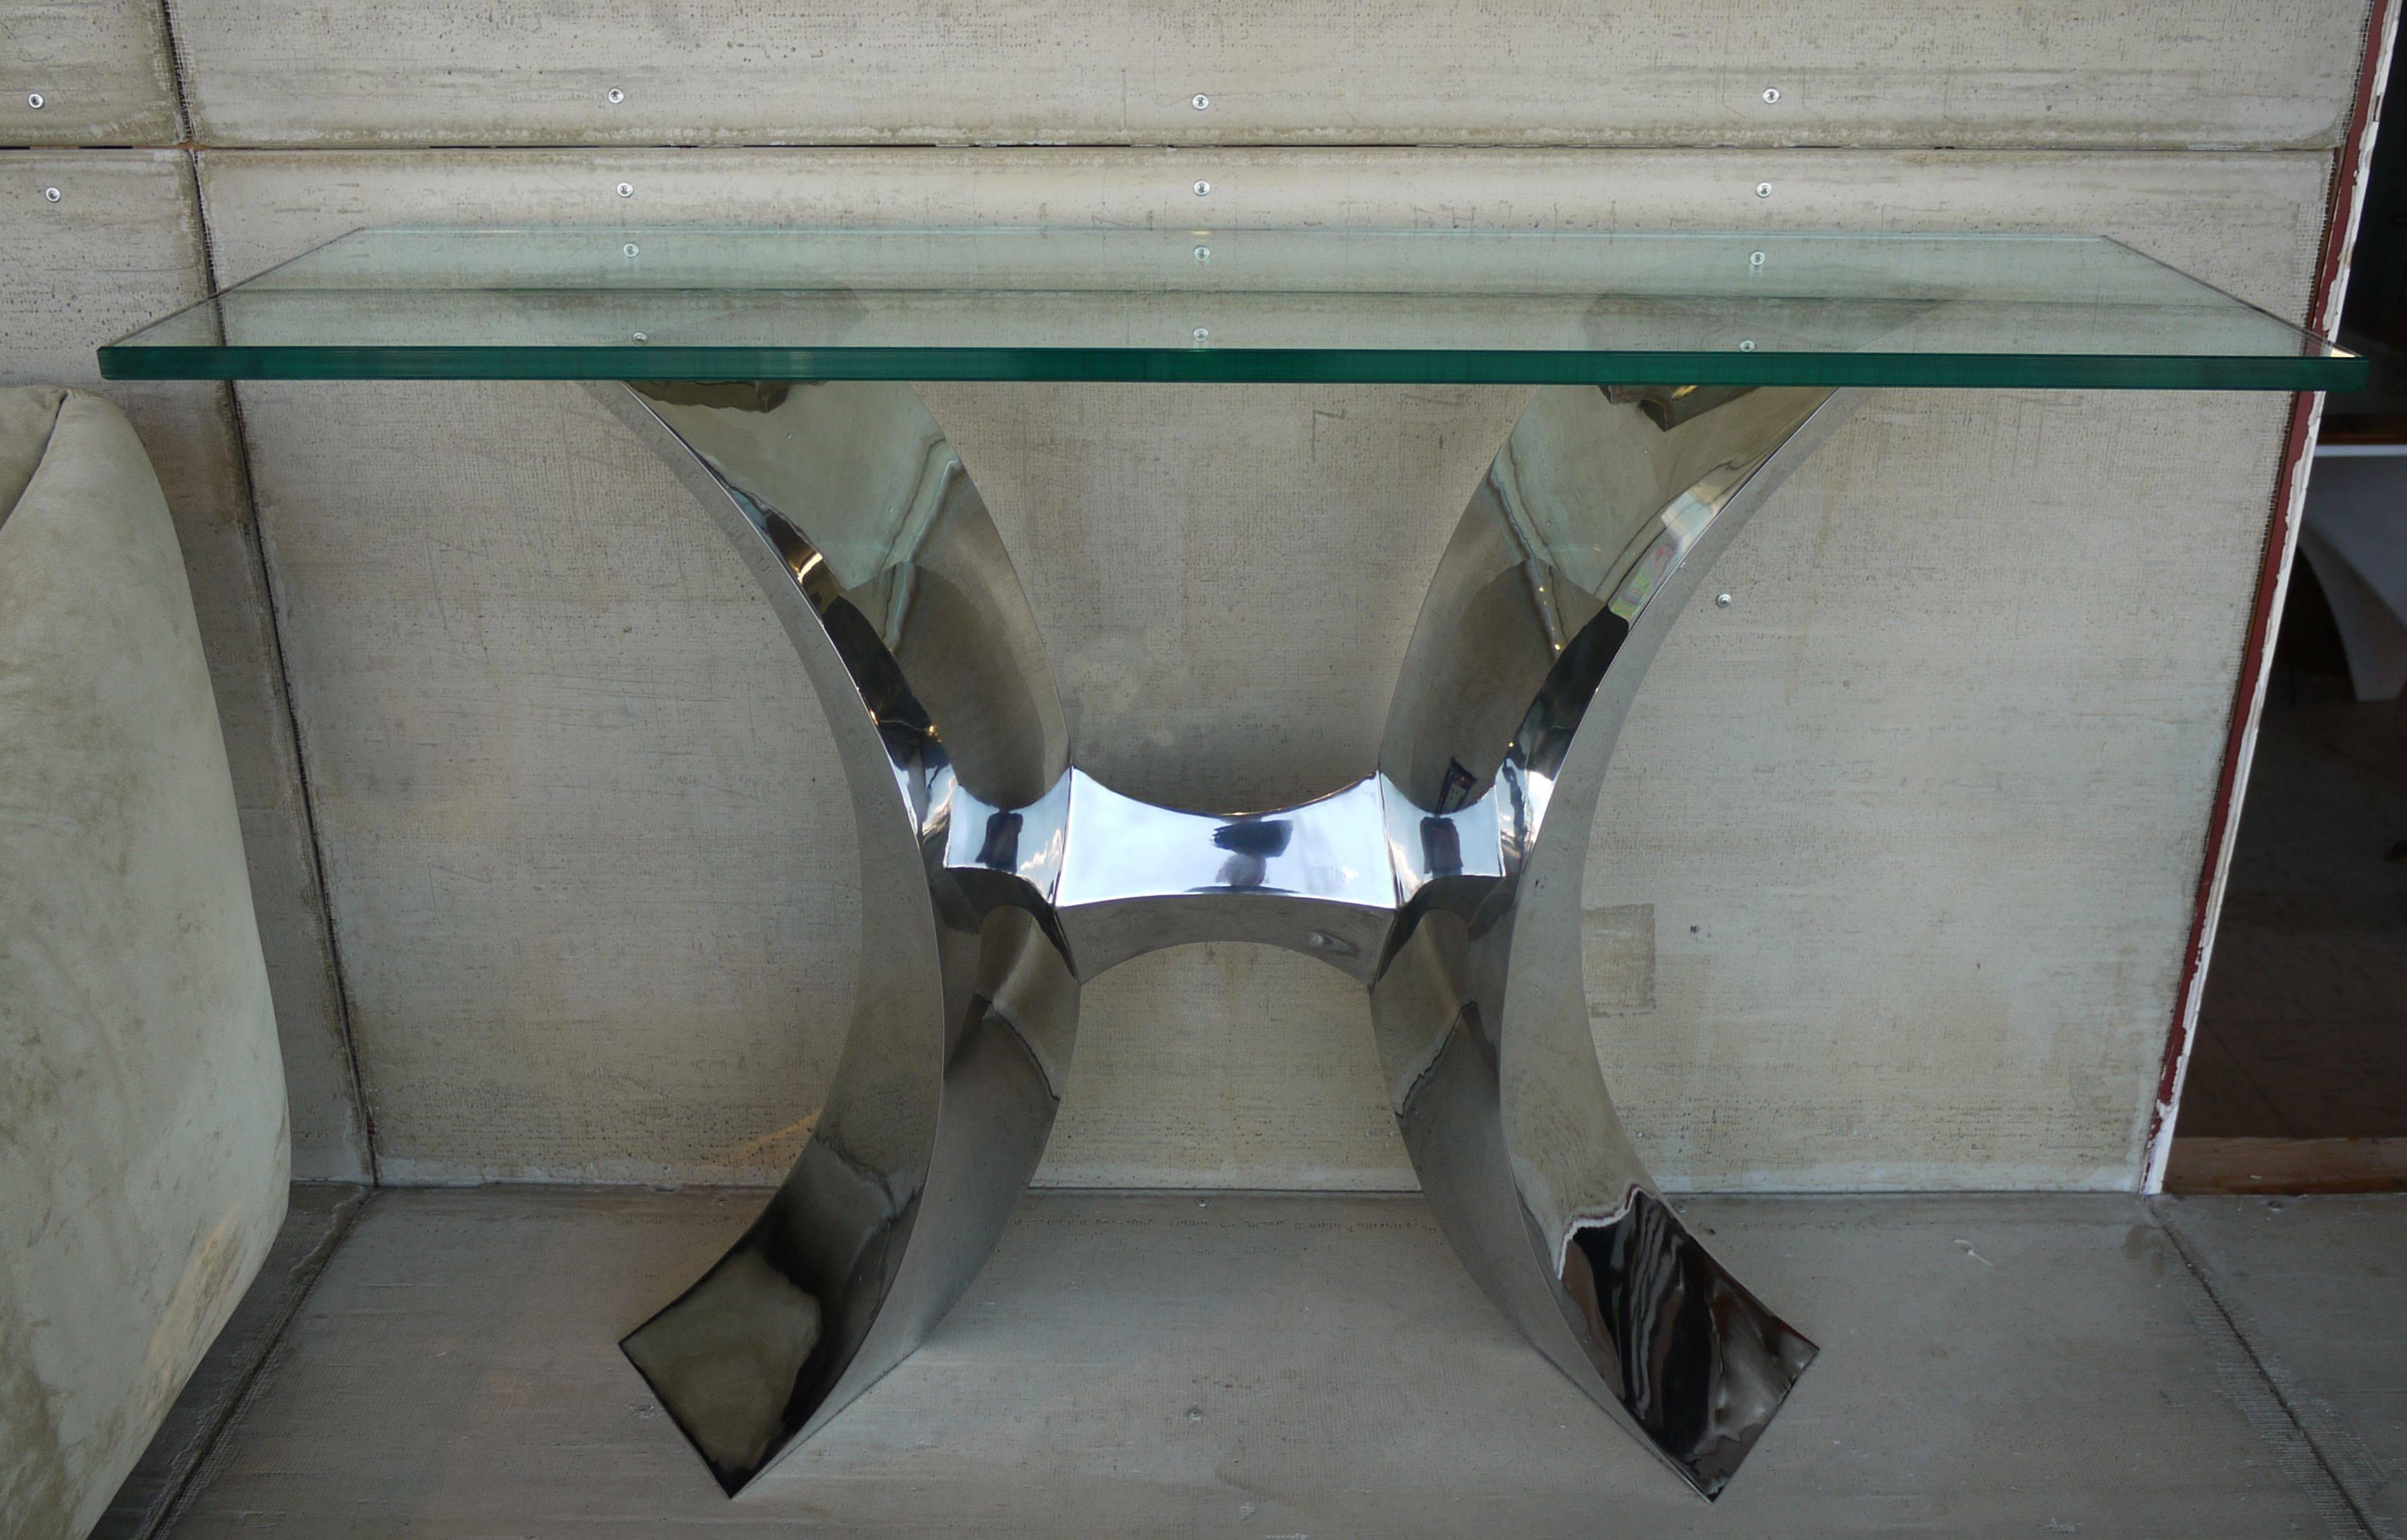 A one of a kind hand-forged stainless steel console by craftsman Curtis Norton featuring diamond shaped arches supporting a thick glass top. The console has been polished to a mirror like shine.